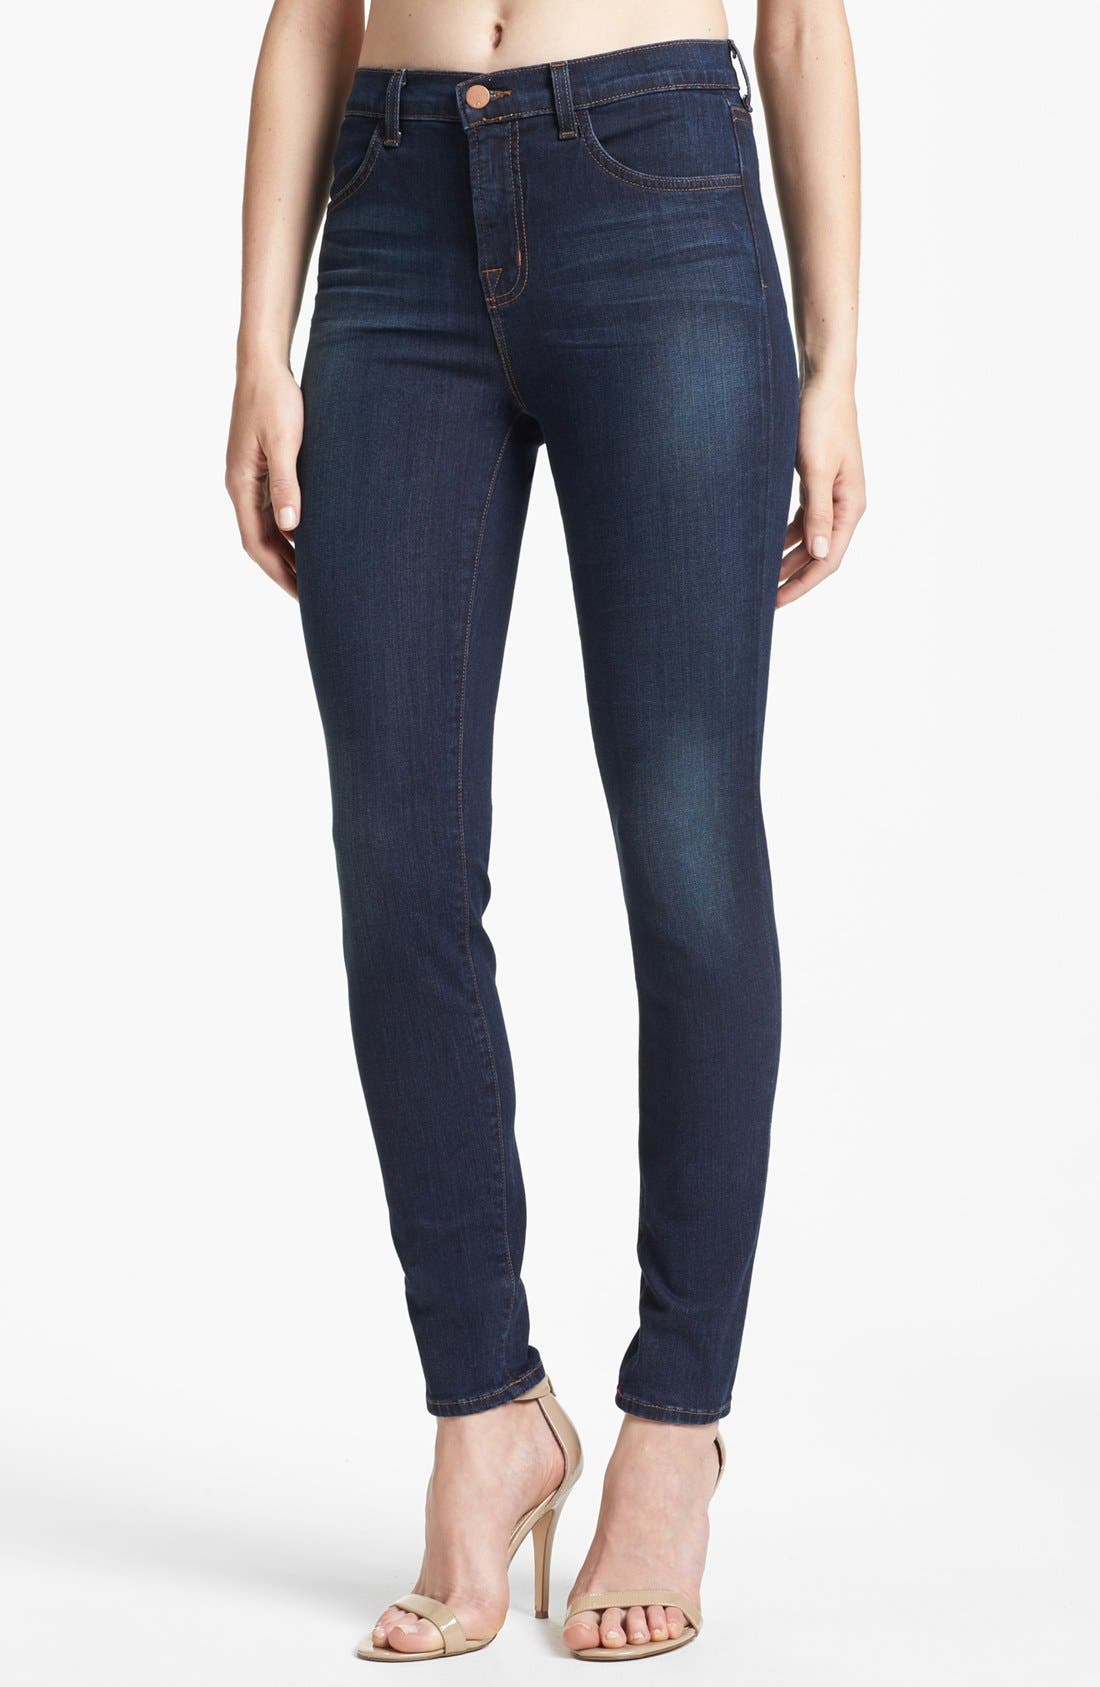 style & co jeggings